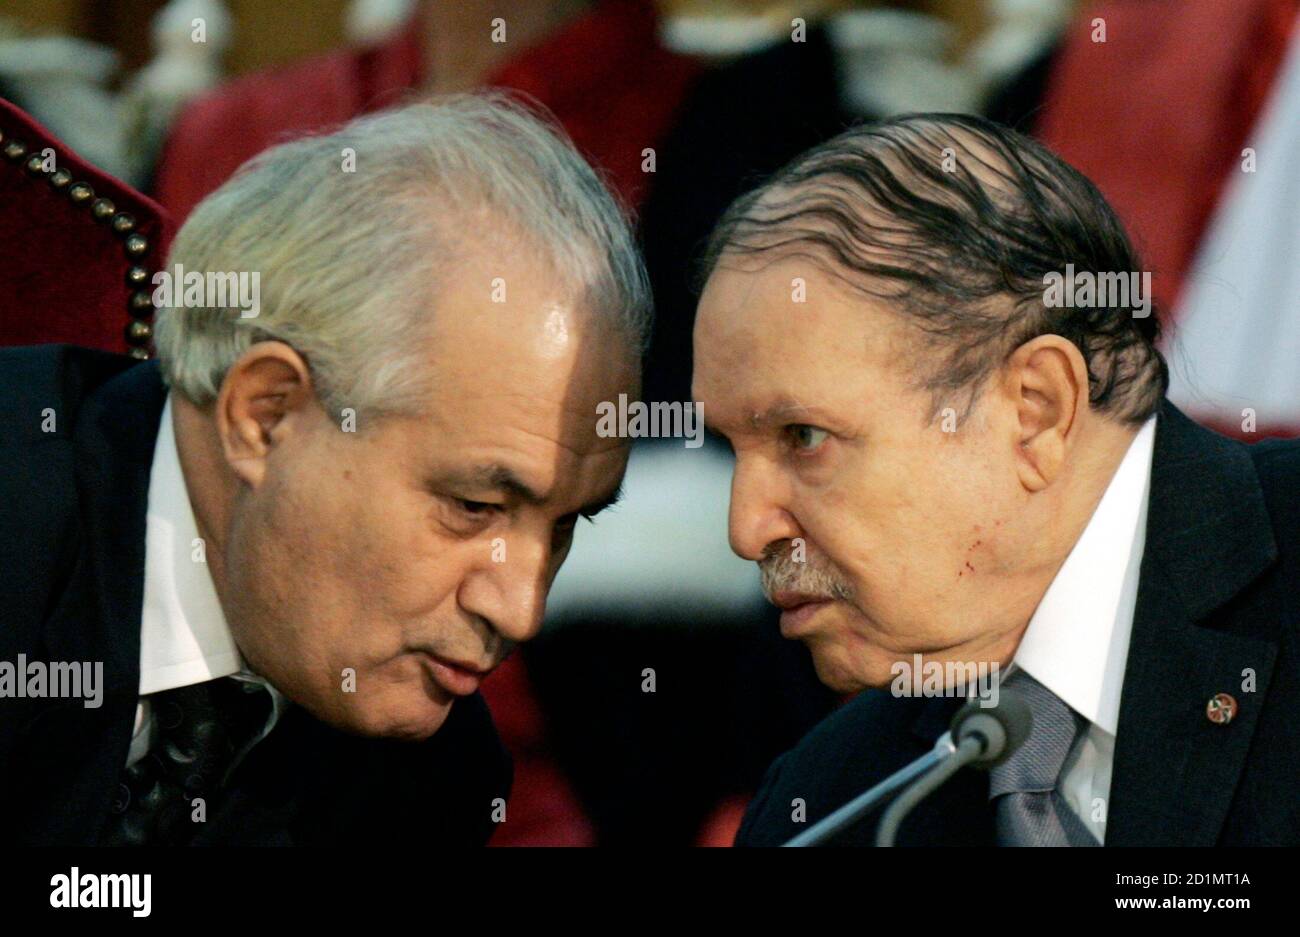 Algeria's President Abdelaziz Bouteflika (R) talks to Justice Minister Taidb Belaiz as they attend the opening ceremony of the judiciary year at the supreme court in Algiers October 29, 2008. Bouteflika, reaching the end of his second and final term, said on Wednesday he wanted to alter Algeria's constitution in a manner several analysts interpreted as meaning he intends to stay on. REUTERS/Louafi Larbi (ALGERIA) Stock Photo